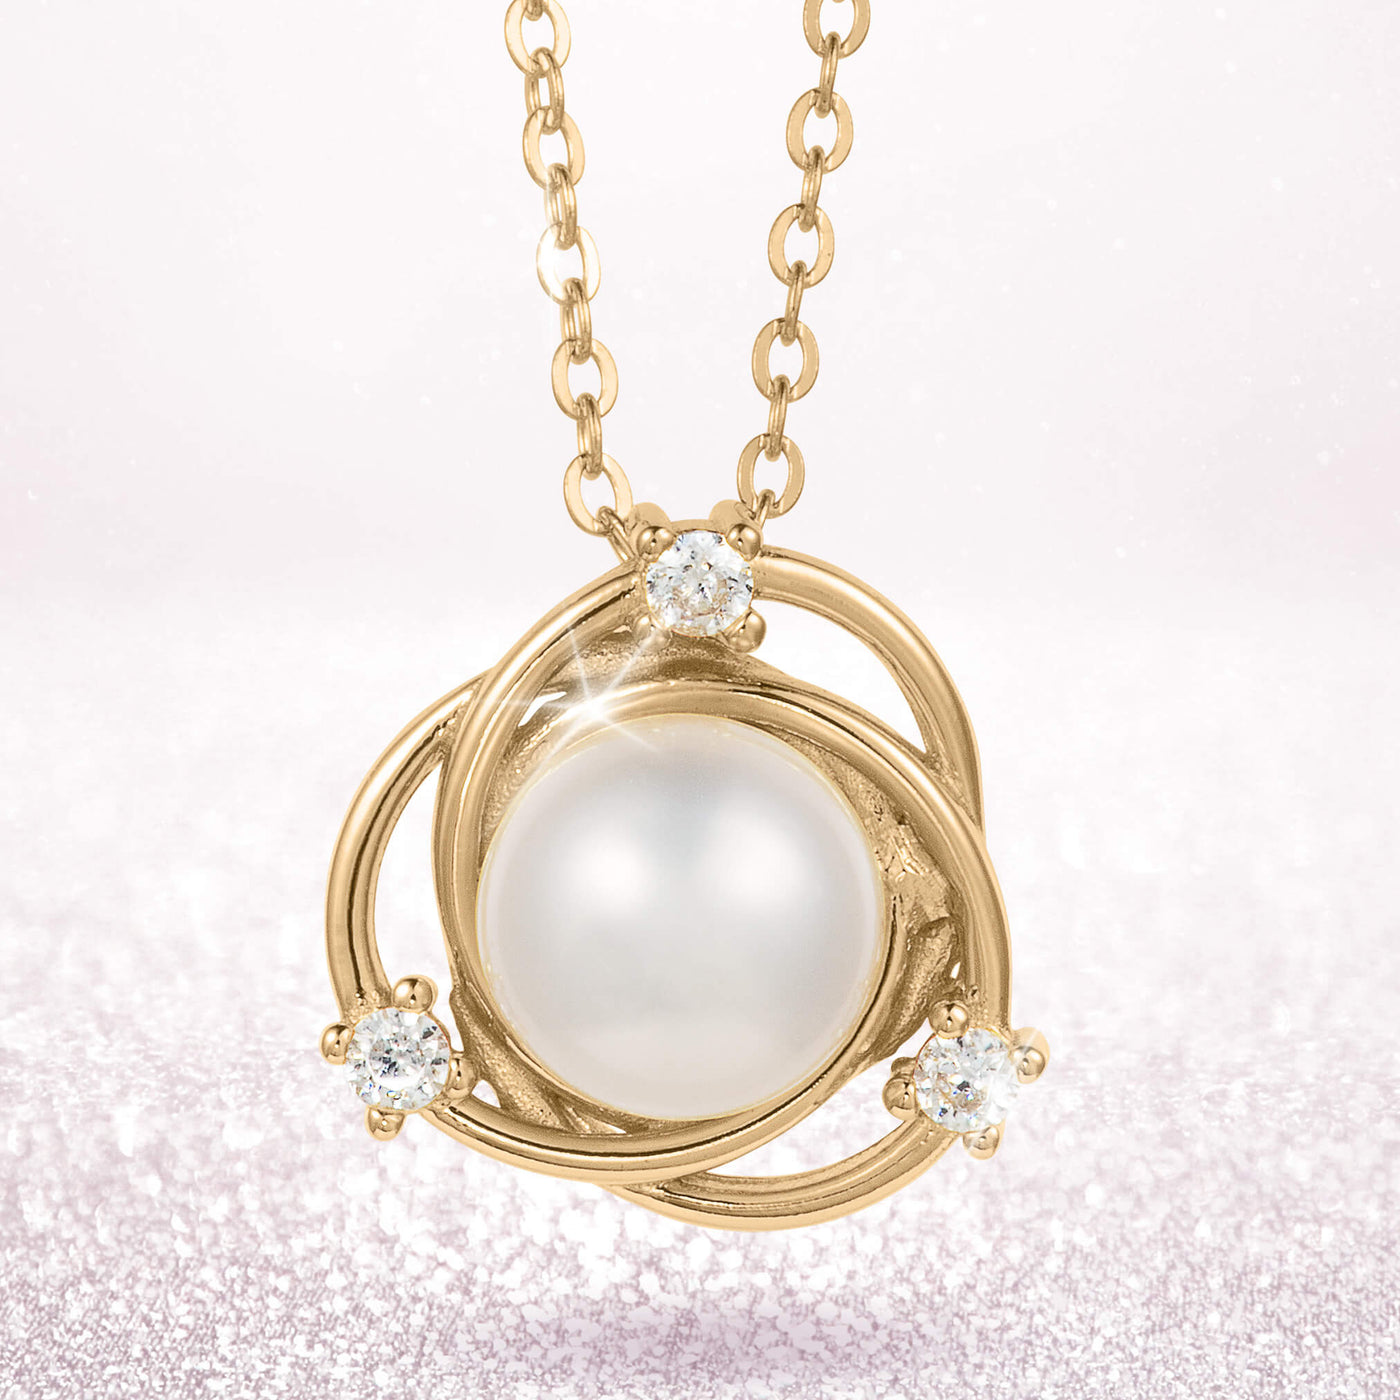 Daniel Steiger Pearl Serenity Collection